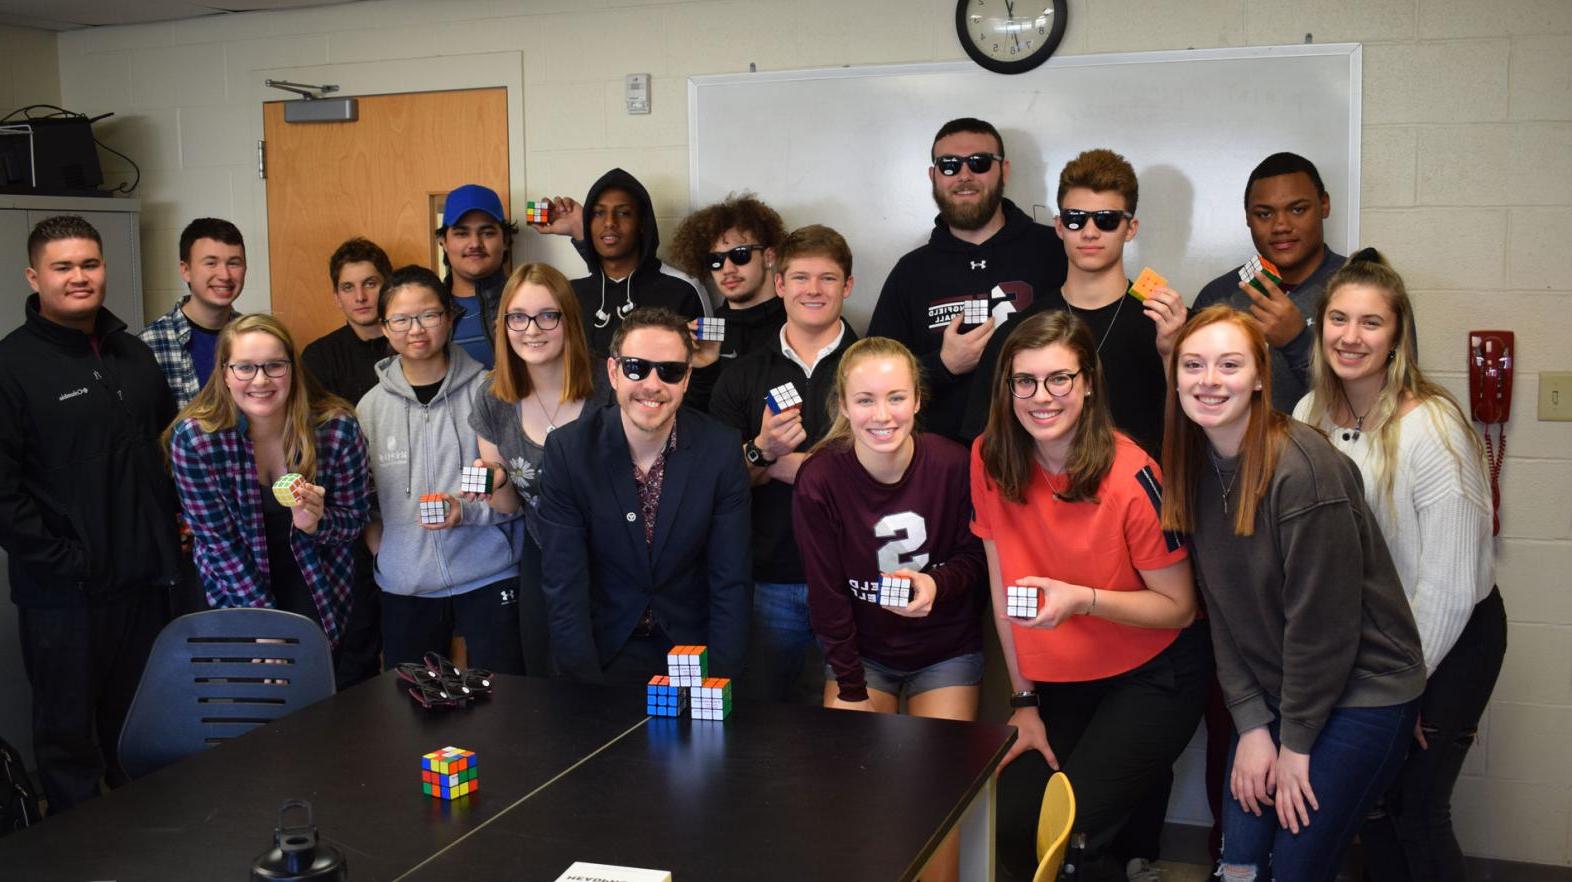 A group of students from the Springfield College Department of Mathematics, Physics, and Computer Science stand together at a Rubik's Cube competition